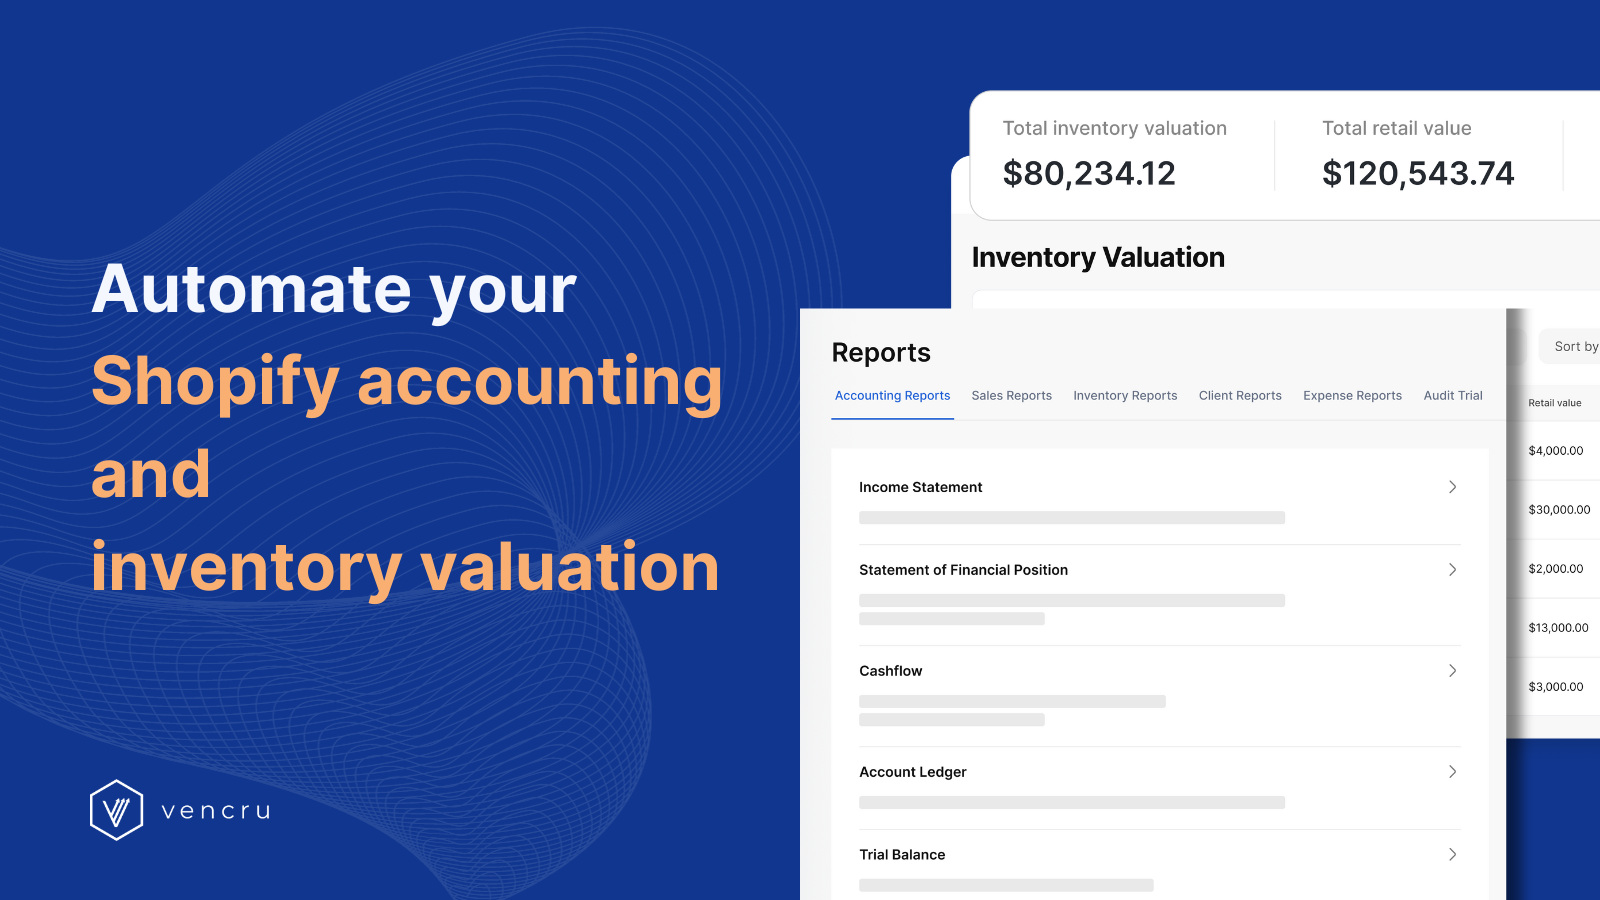 Automate your shopify accounting and inventory valuation